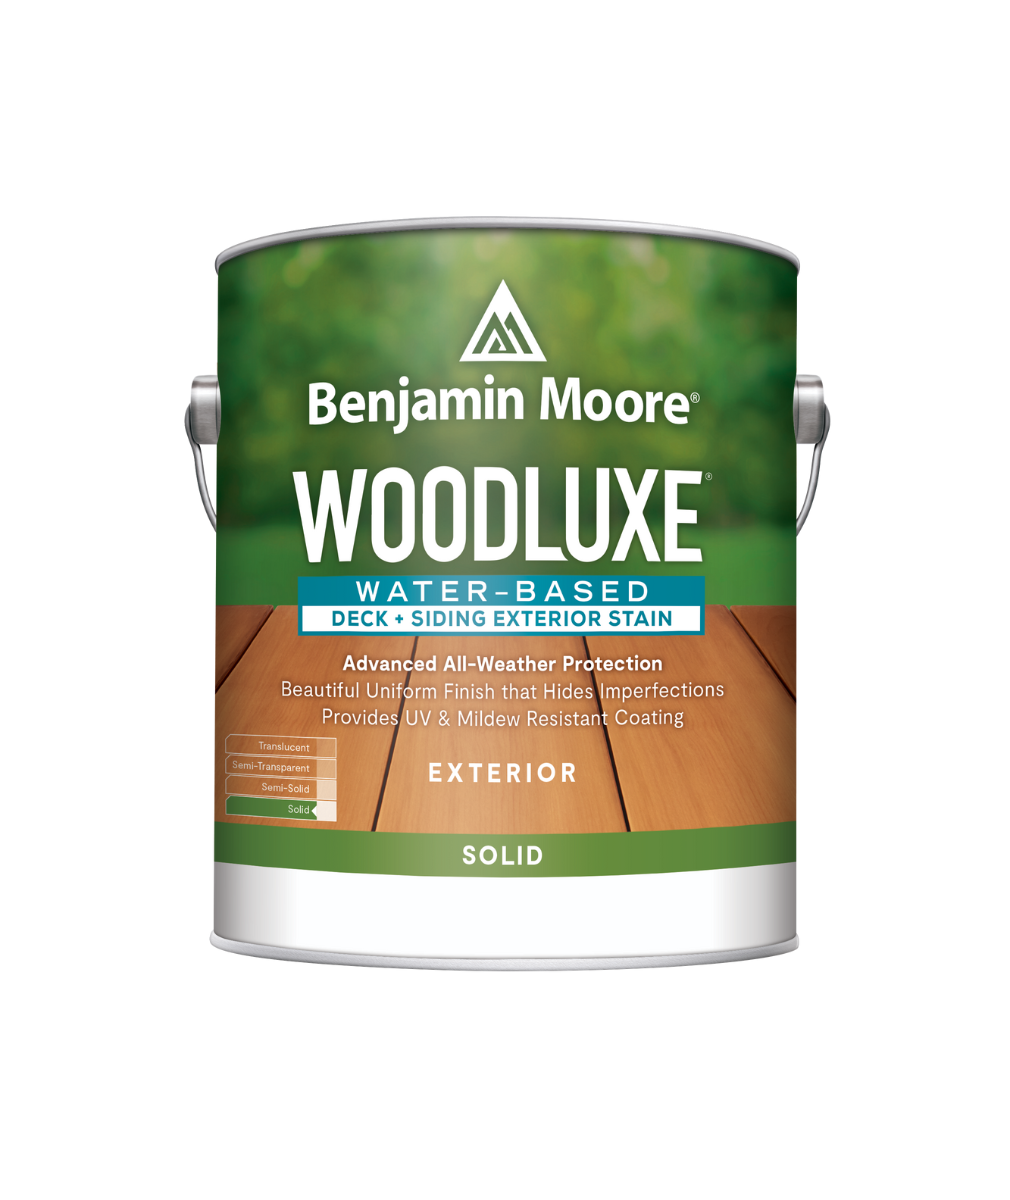 Benjamin Moore Woodluxe® Water-Based Solid Exterior Stain Half-Pint available at JC Licht.